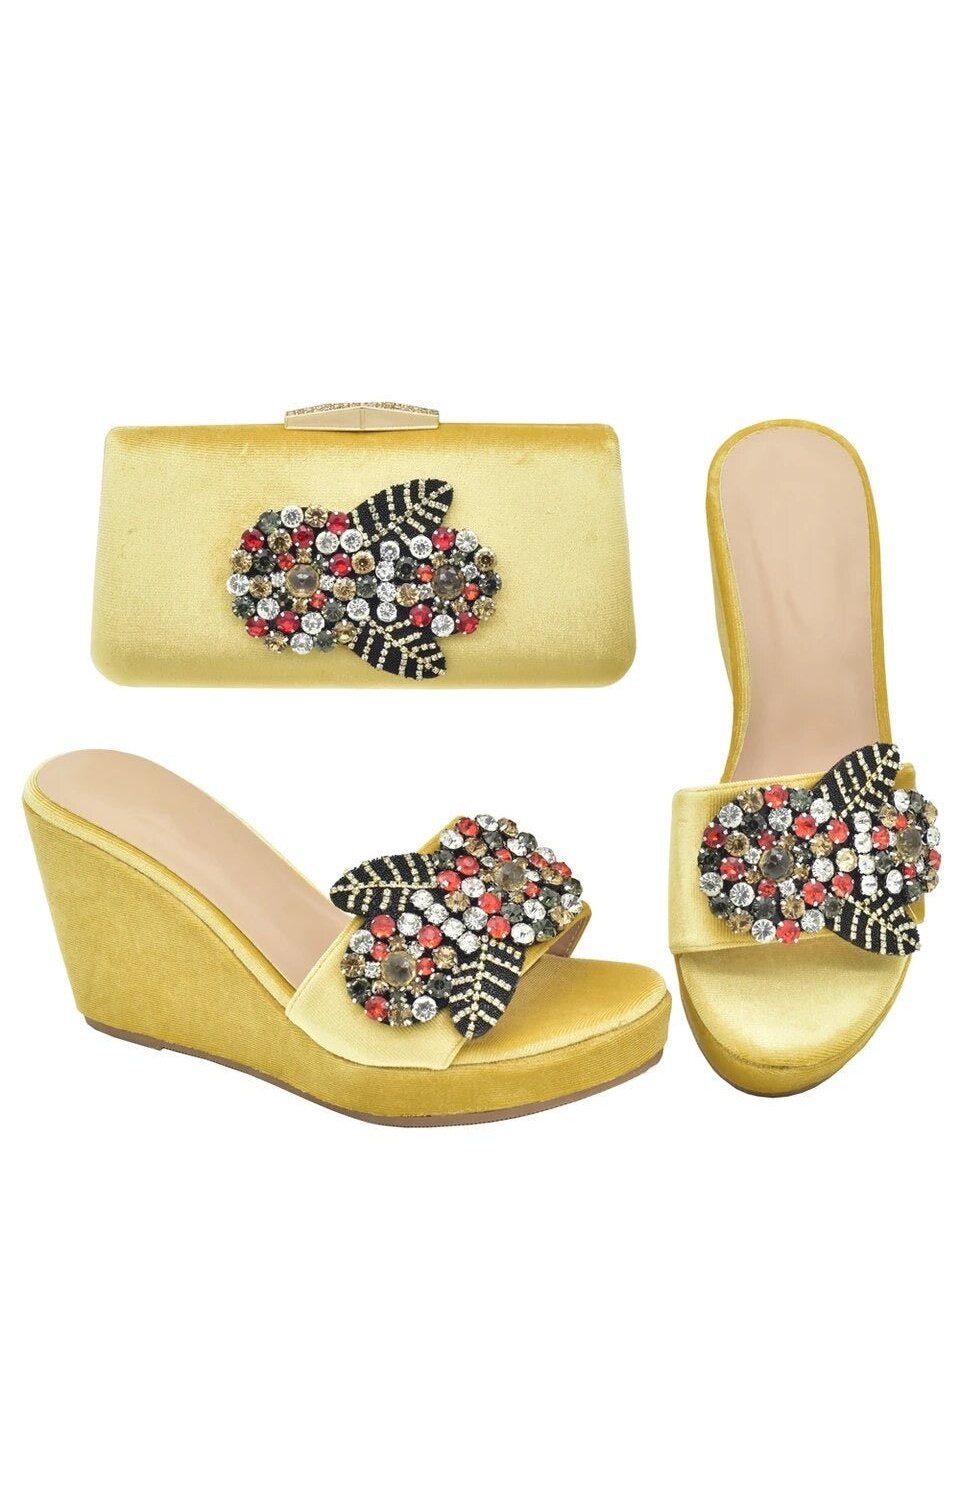 Wedges  with Matching Clutch (Many Colors)